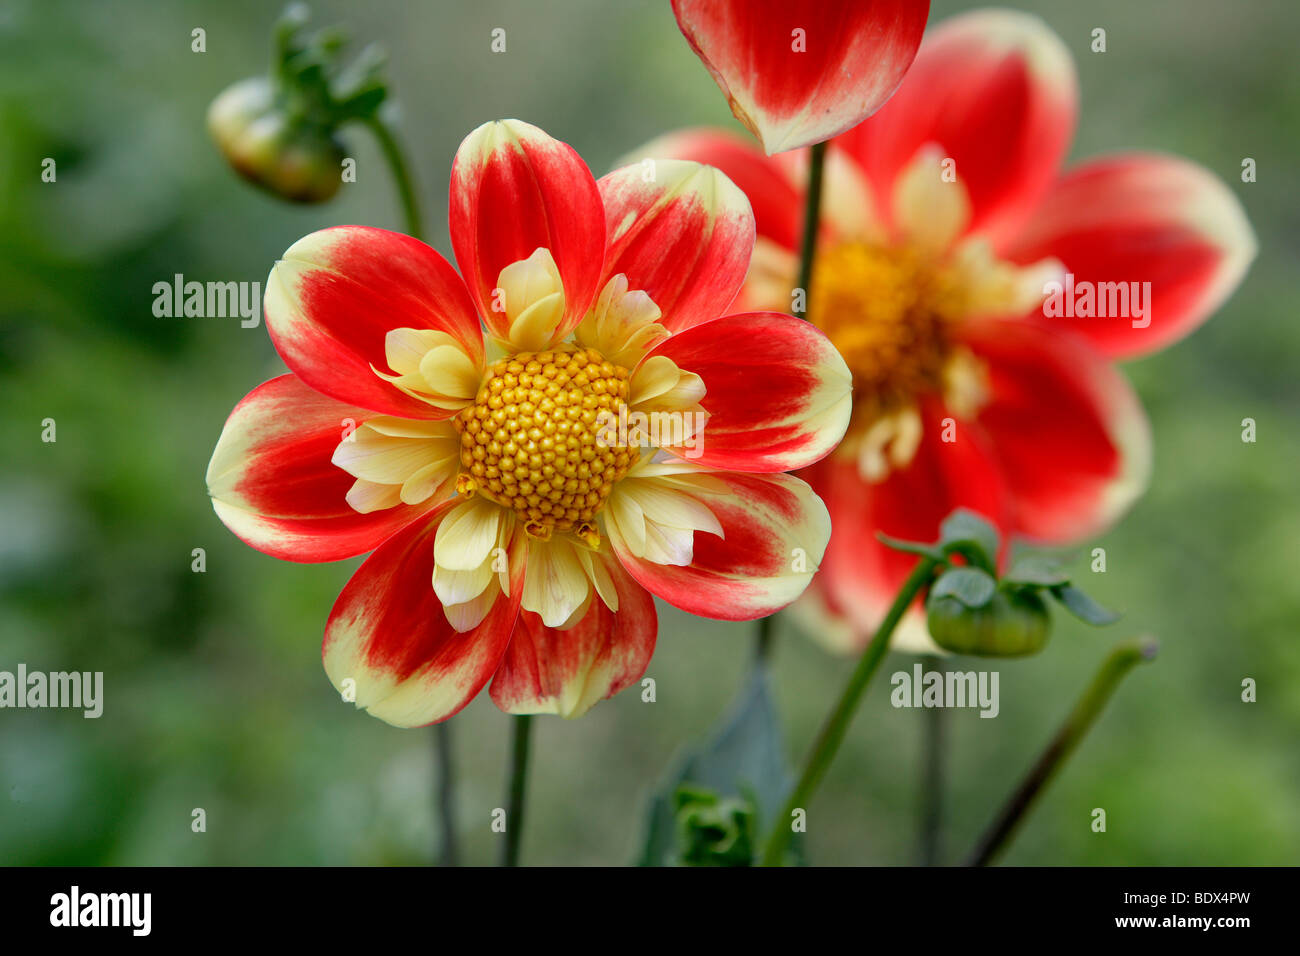 'Der rote Schorsch', red and yellow flowers, Dahlia (Dahlia), Bedding Plant of the year 2009 Stock Photo